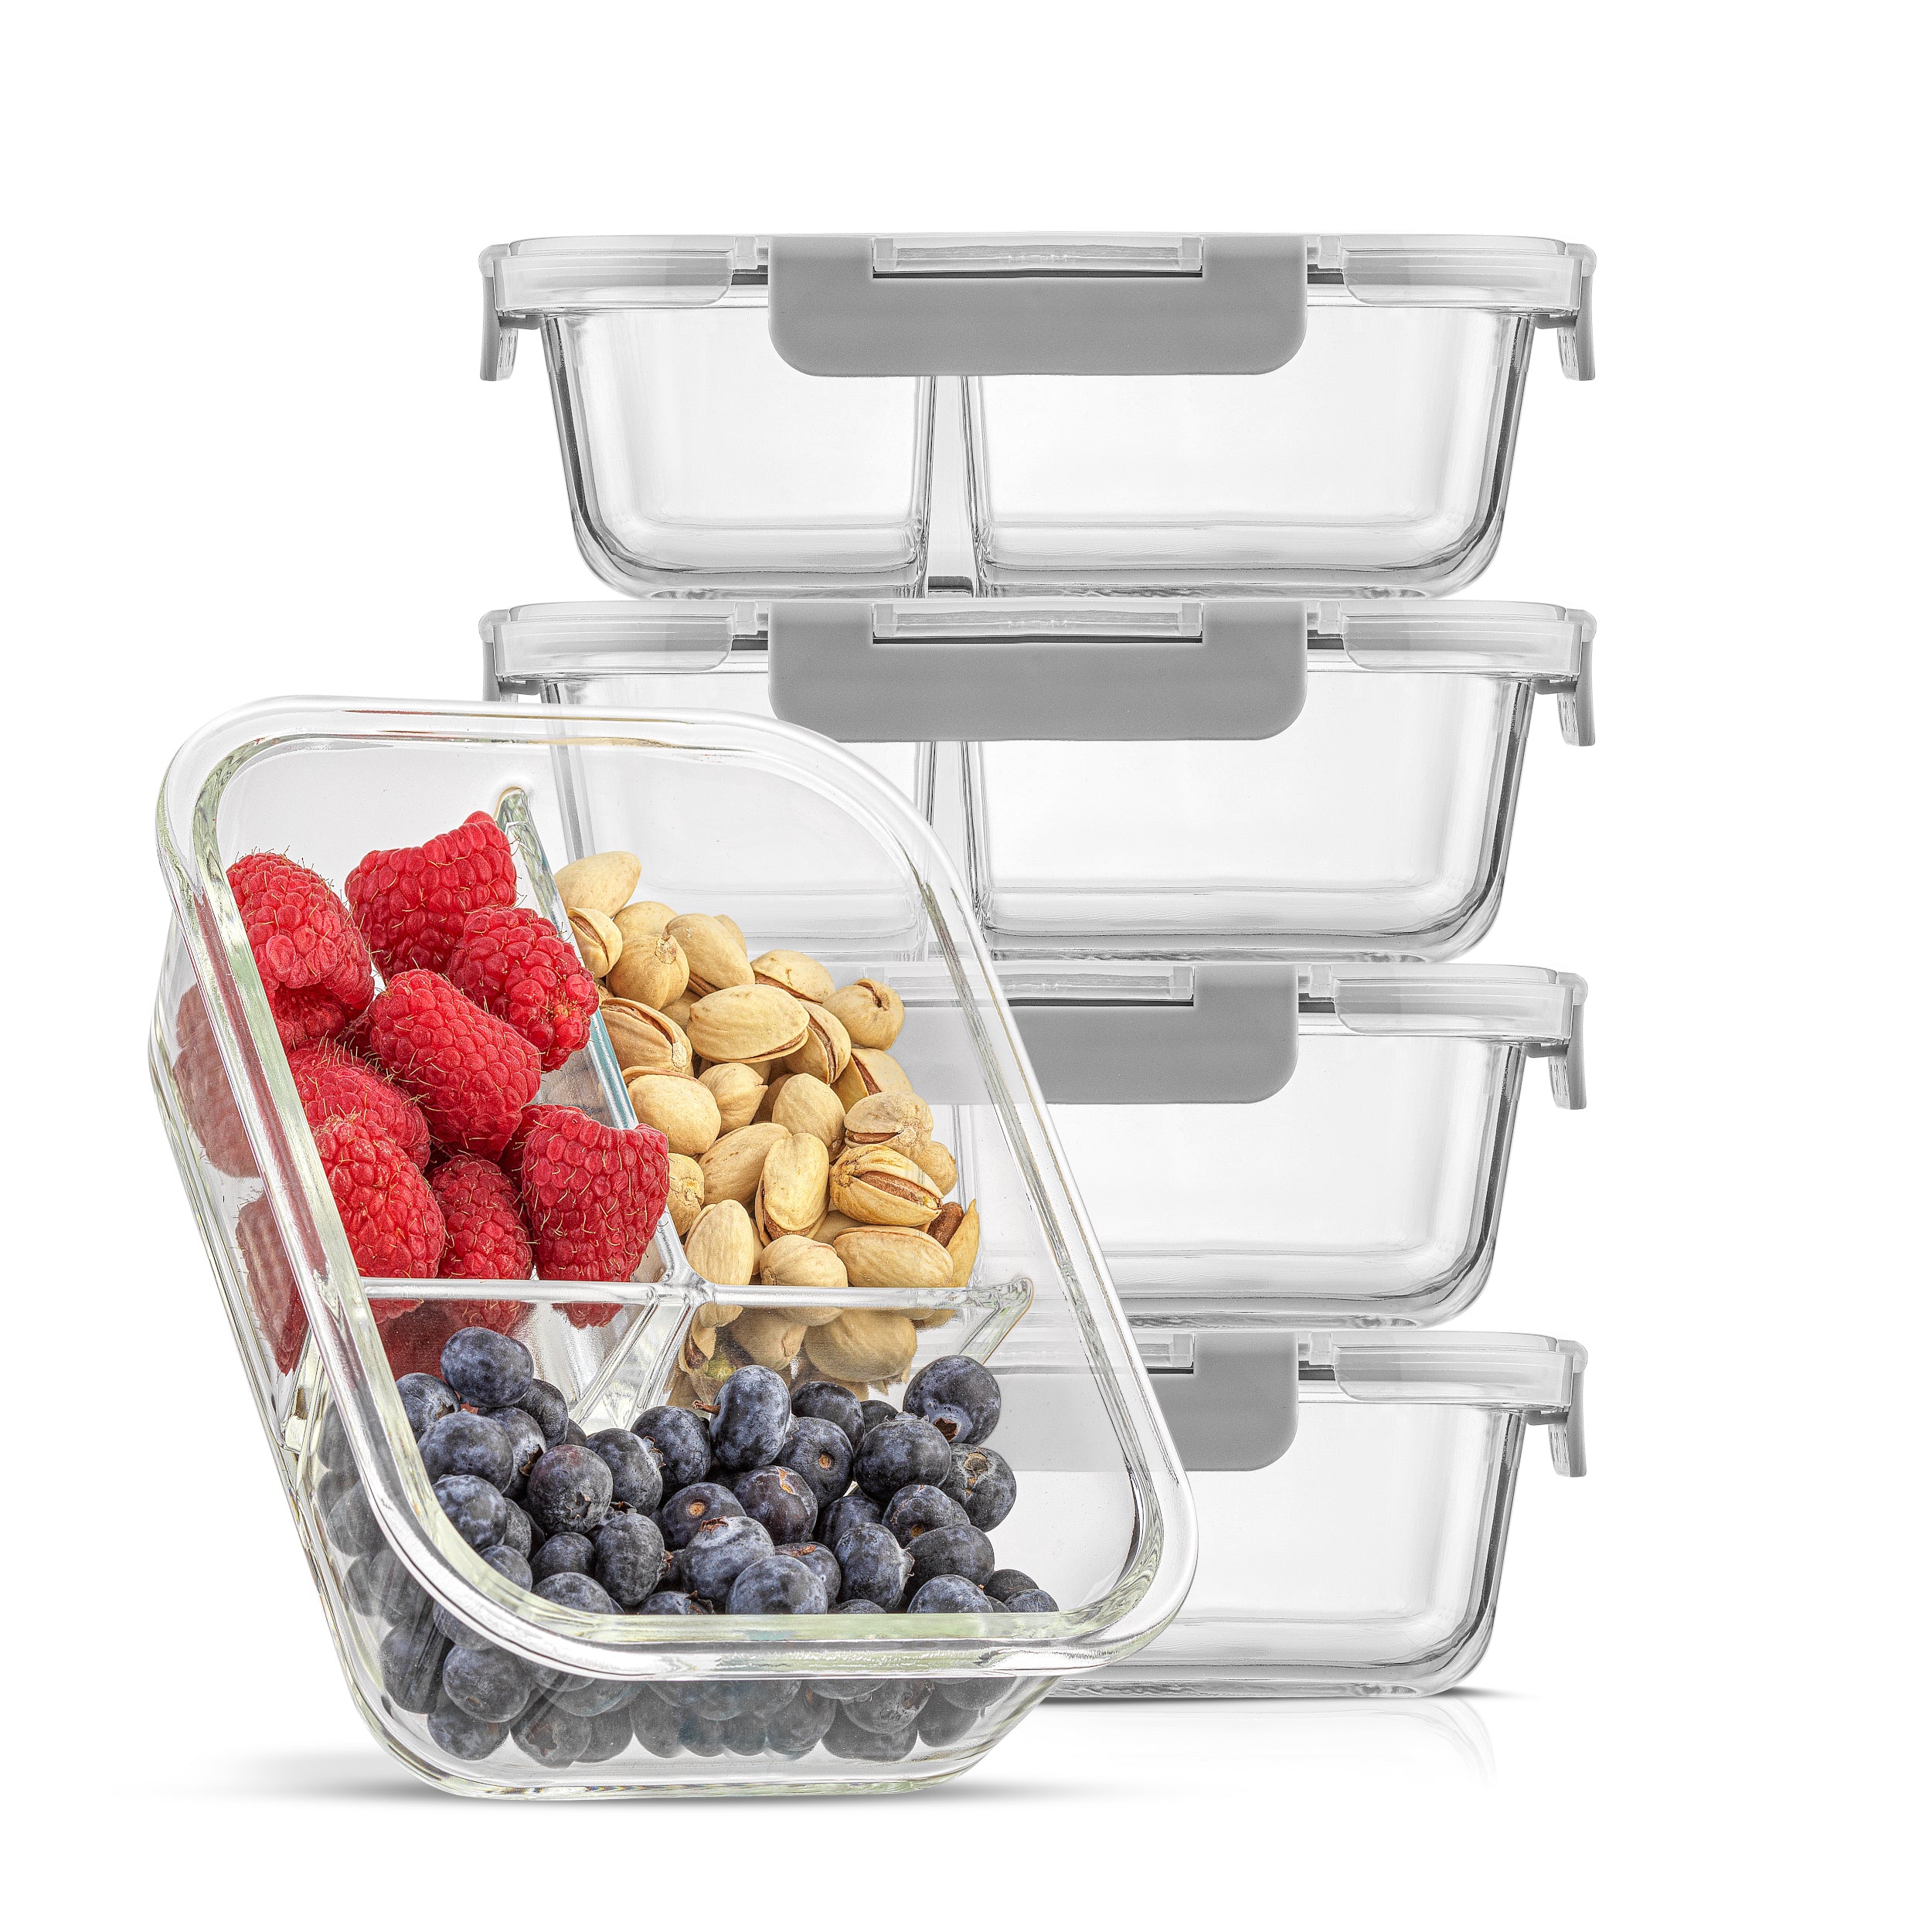 JoyJolt 3-Sectional Meal Prep Food Storage Containers